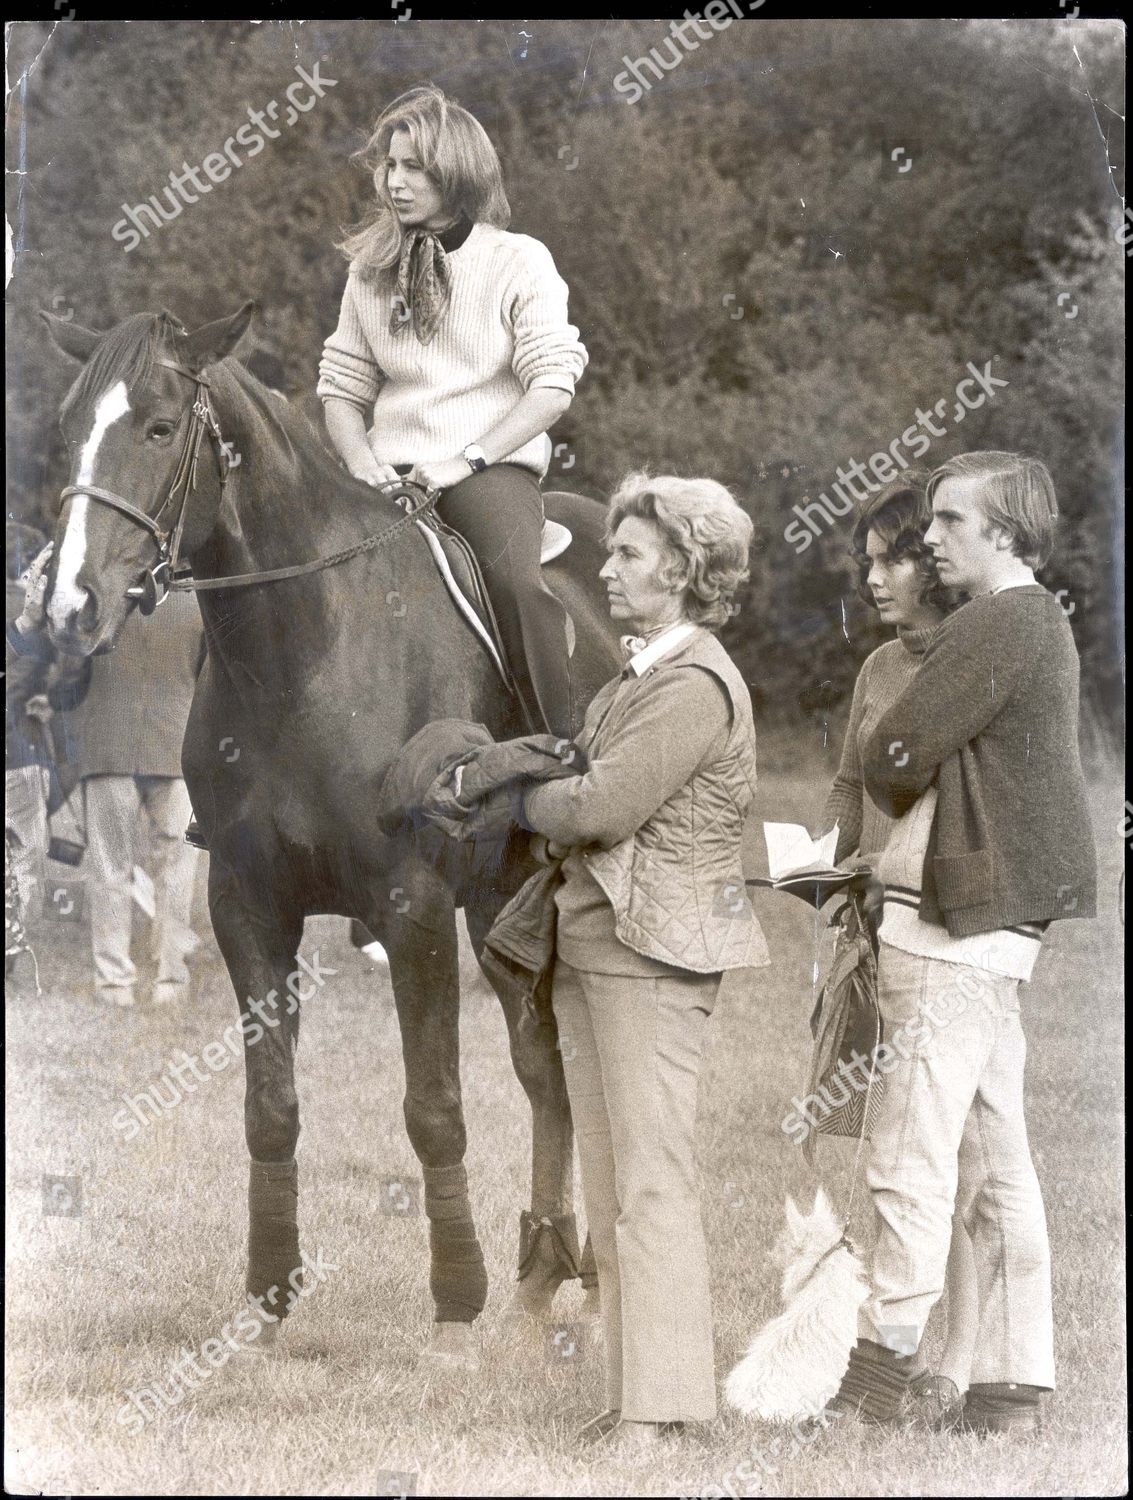 princess-anne-now-princess-royal-october-1972-princess-anne-watching-midland-bank-horse-trials-from-horseback-royalty-shutterstock-editorial-891071a.jpg